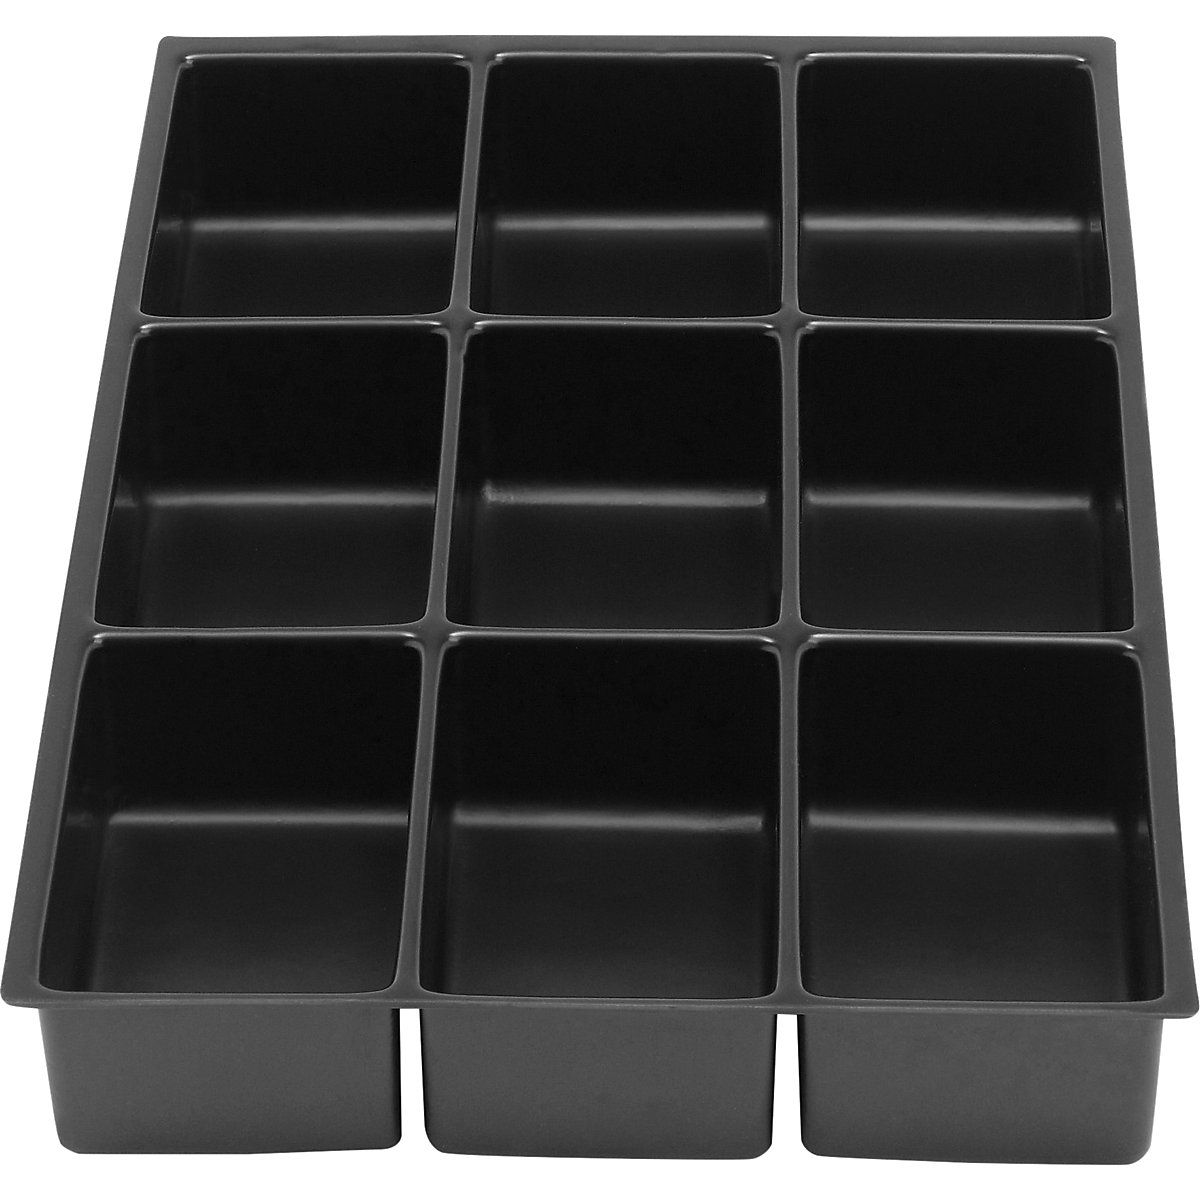 MultiDrawer™ drawer insert – BISLEY, format A4, height 48 mm, 9 compartments-6